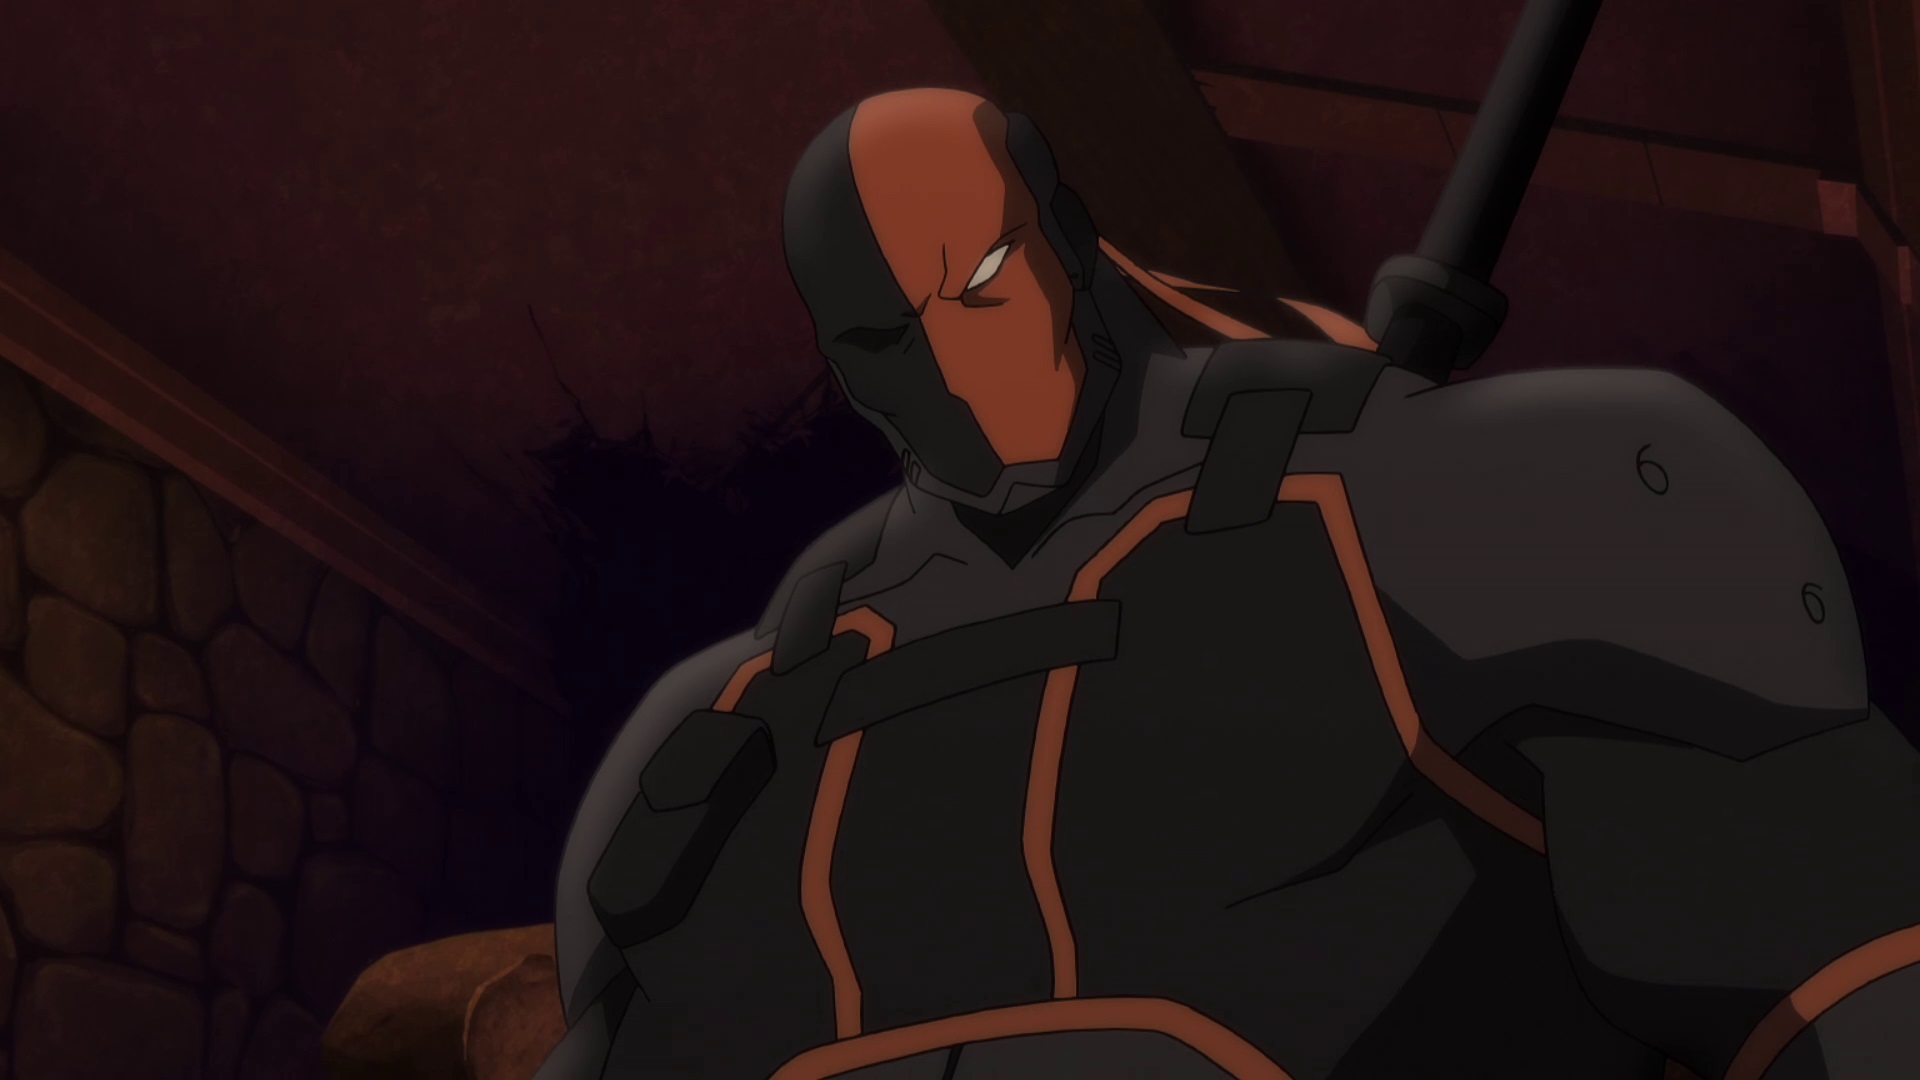 Deathstroke Dc Animated Film Universe Villains Wiki Fandom Powered By Wikia 1416